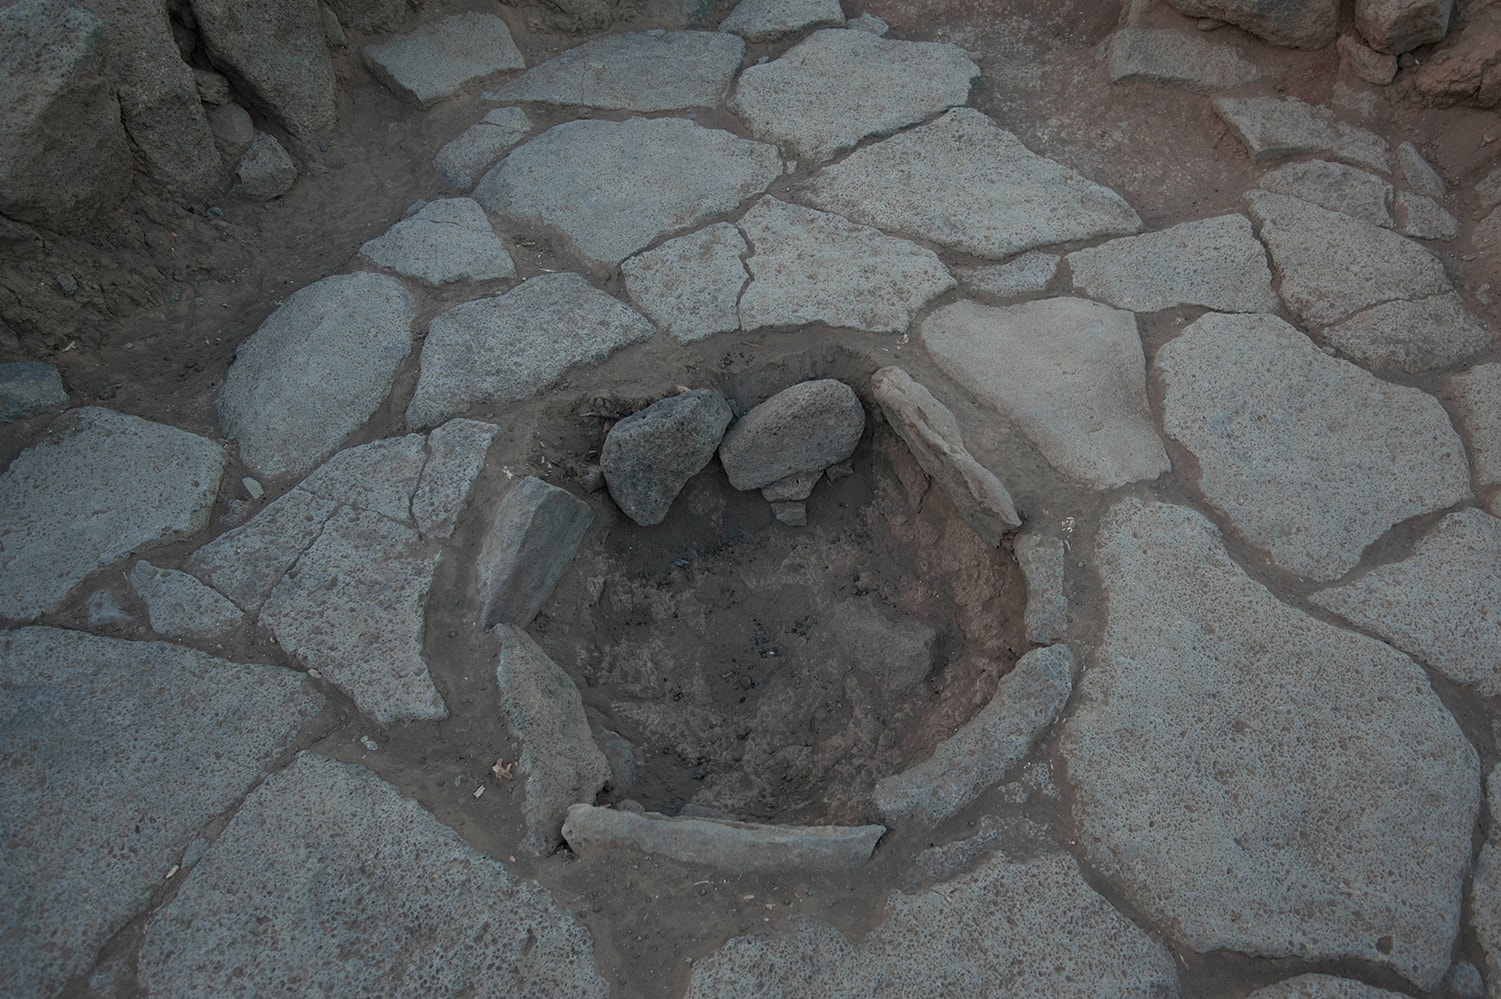 A stone oven